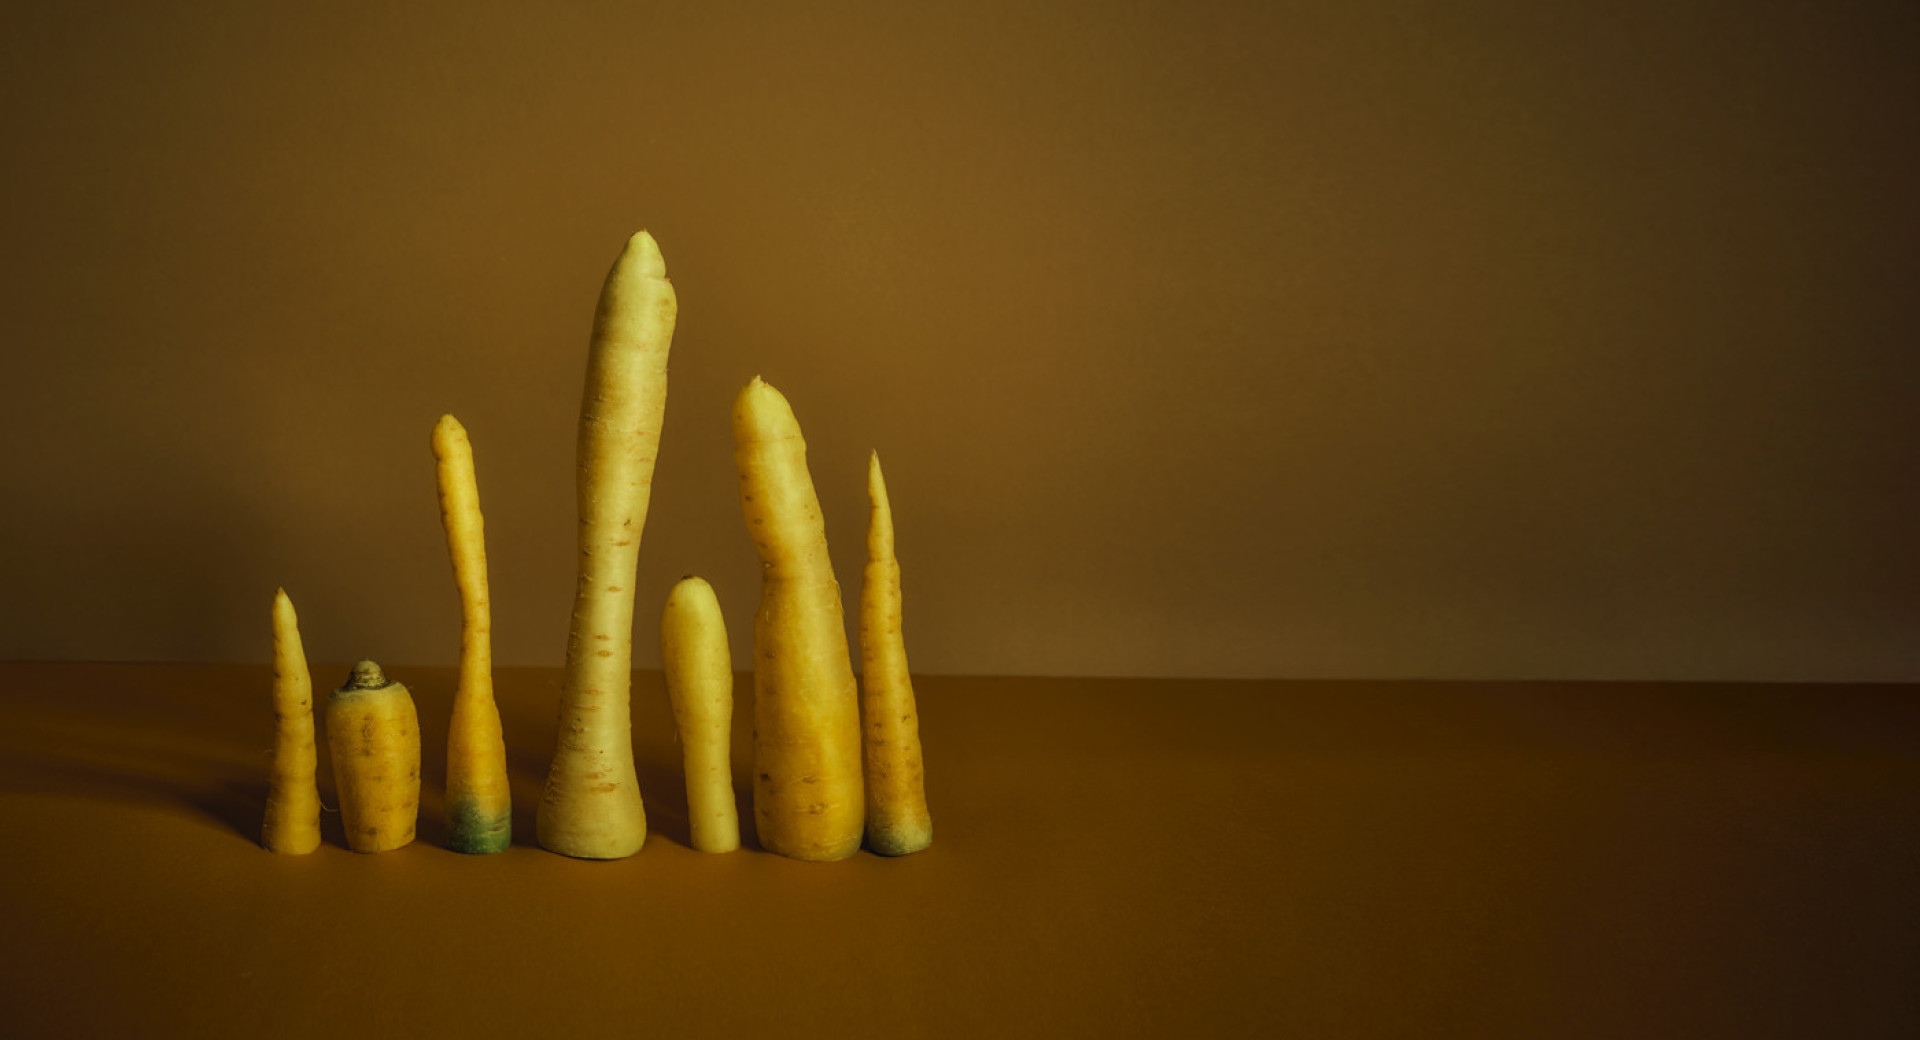 A standing composition of yellow carrots placed on a brown table. The background is light brown.